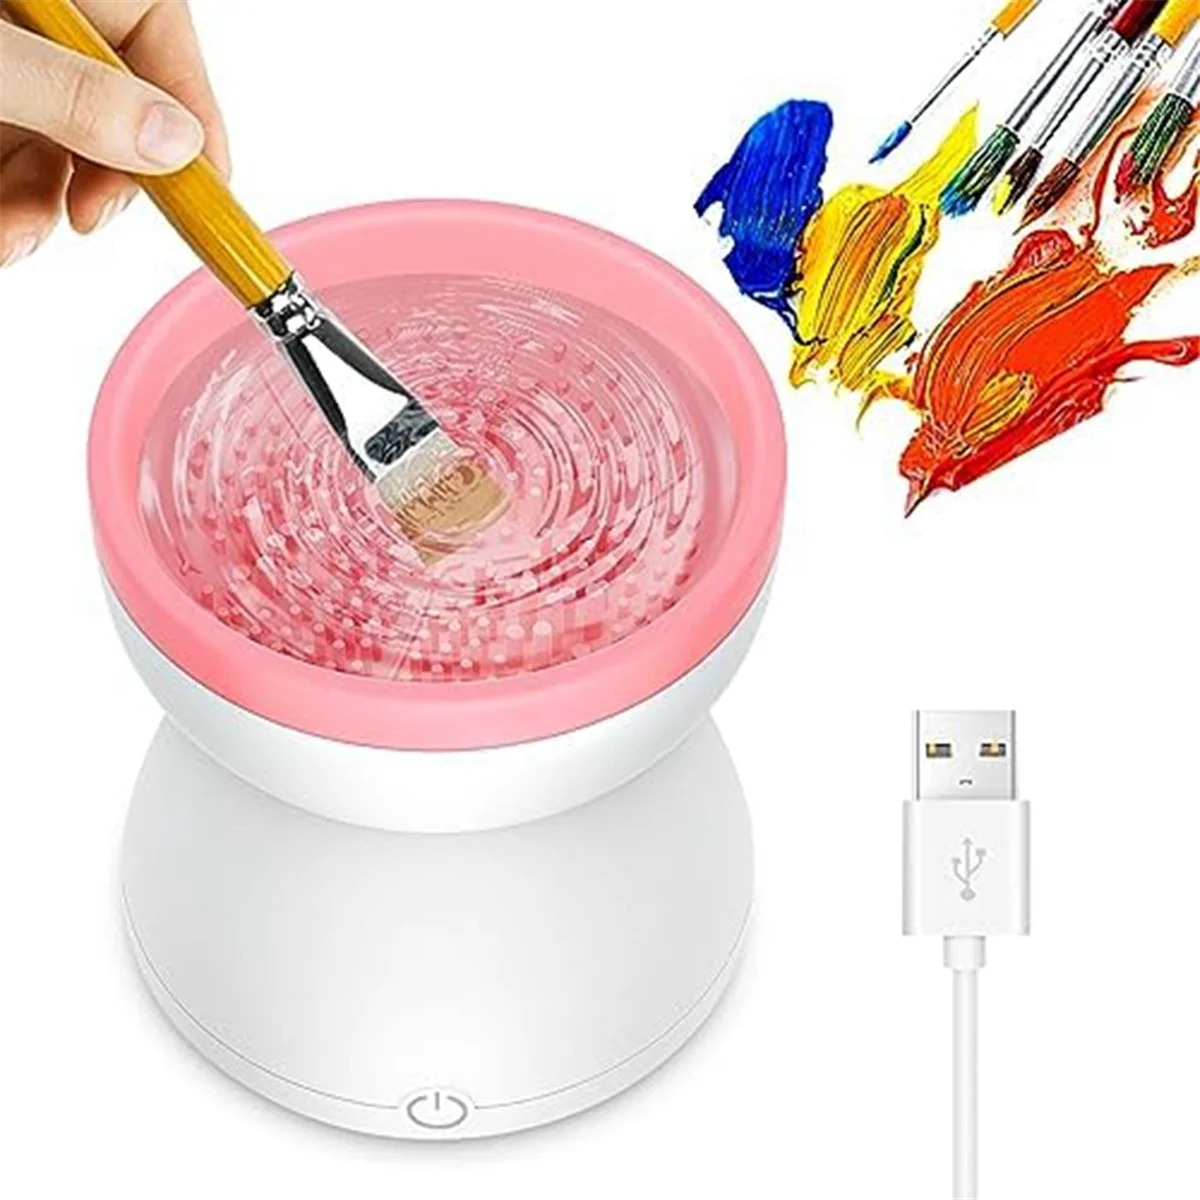 

Electric Paint Brush Cleaner Rinse Cup USB Cleaning Washer Rinser Multifunctional Paint Brush Cleaning Tool for Acrylic